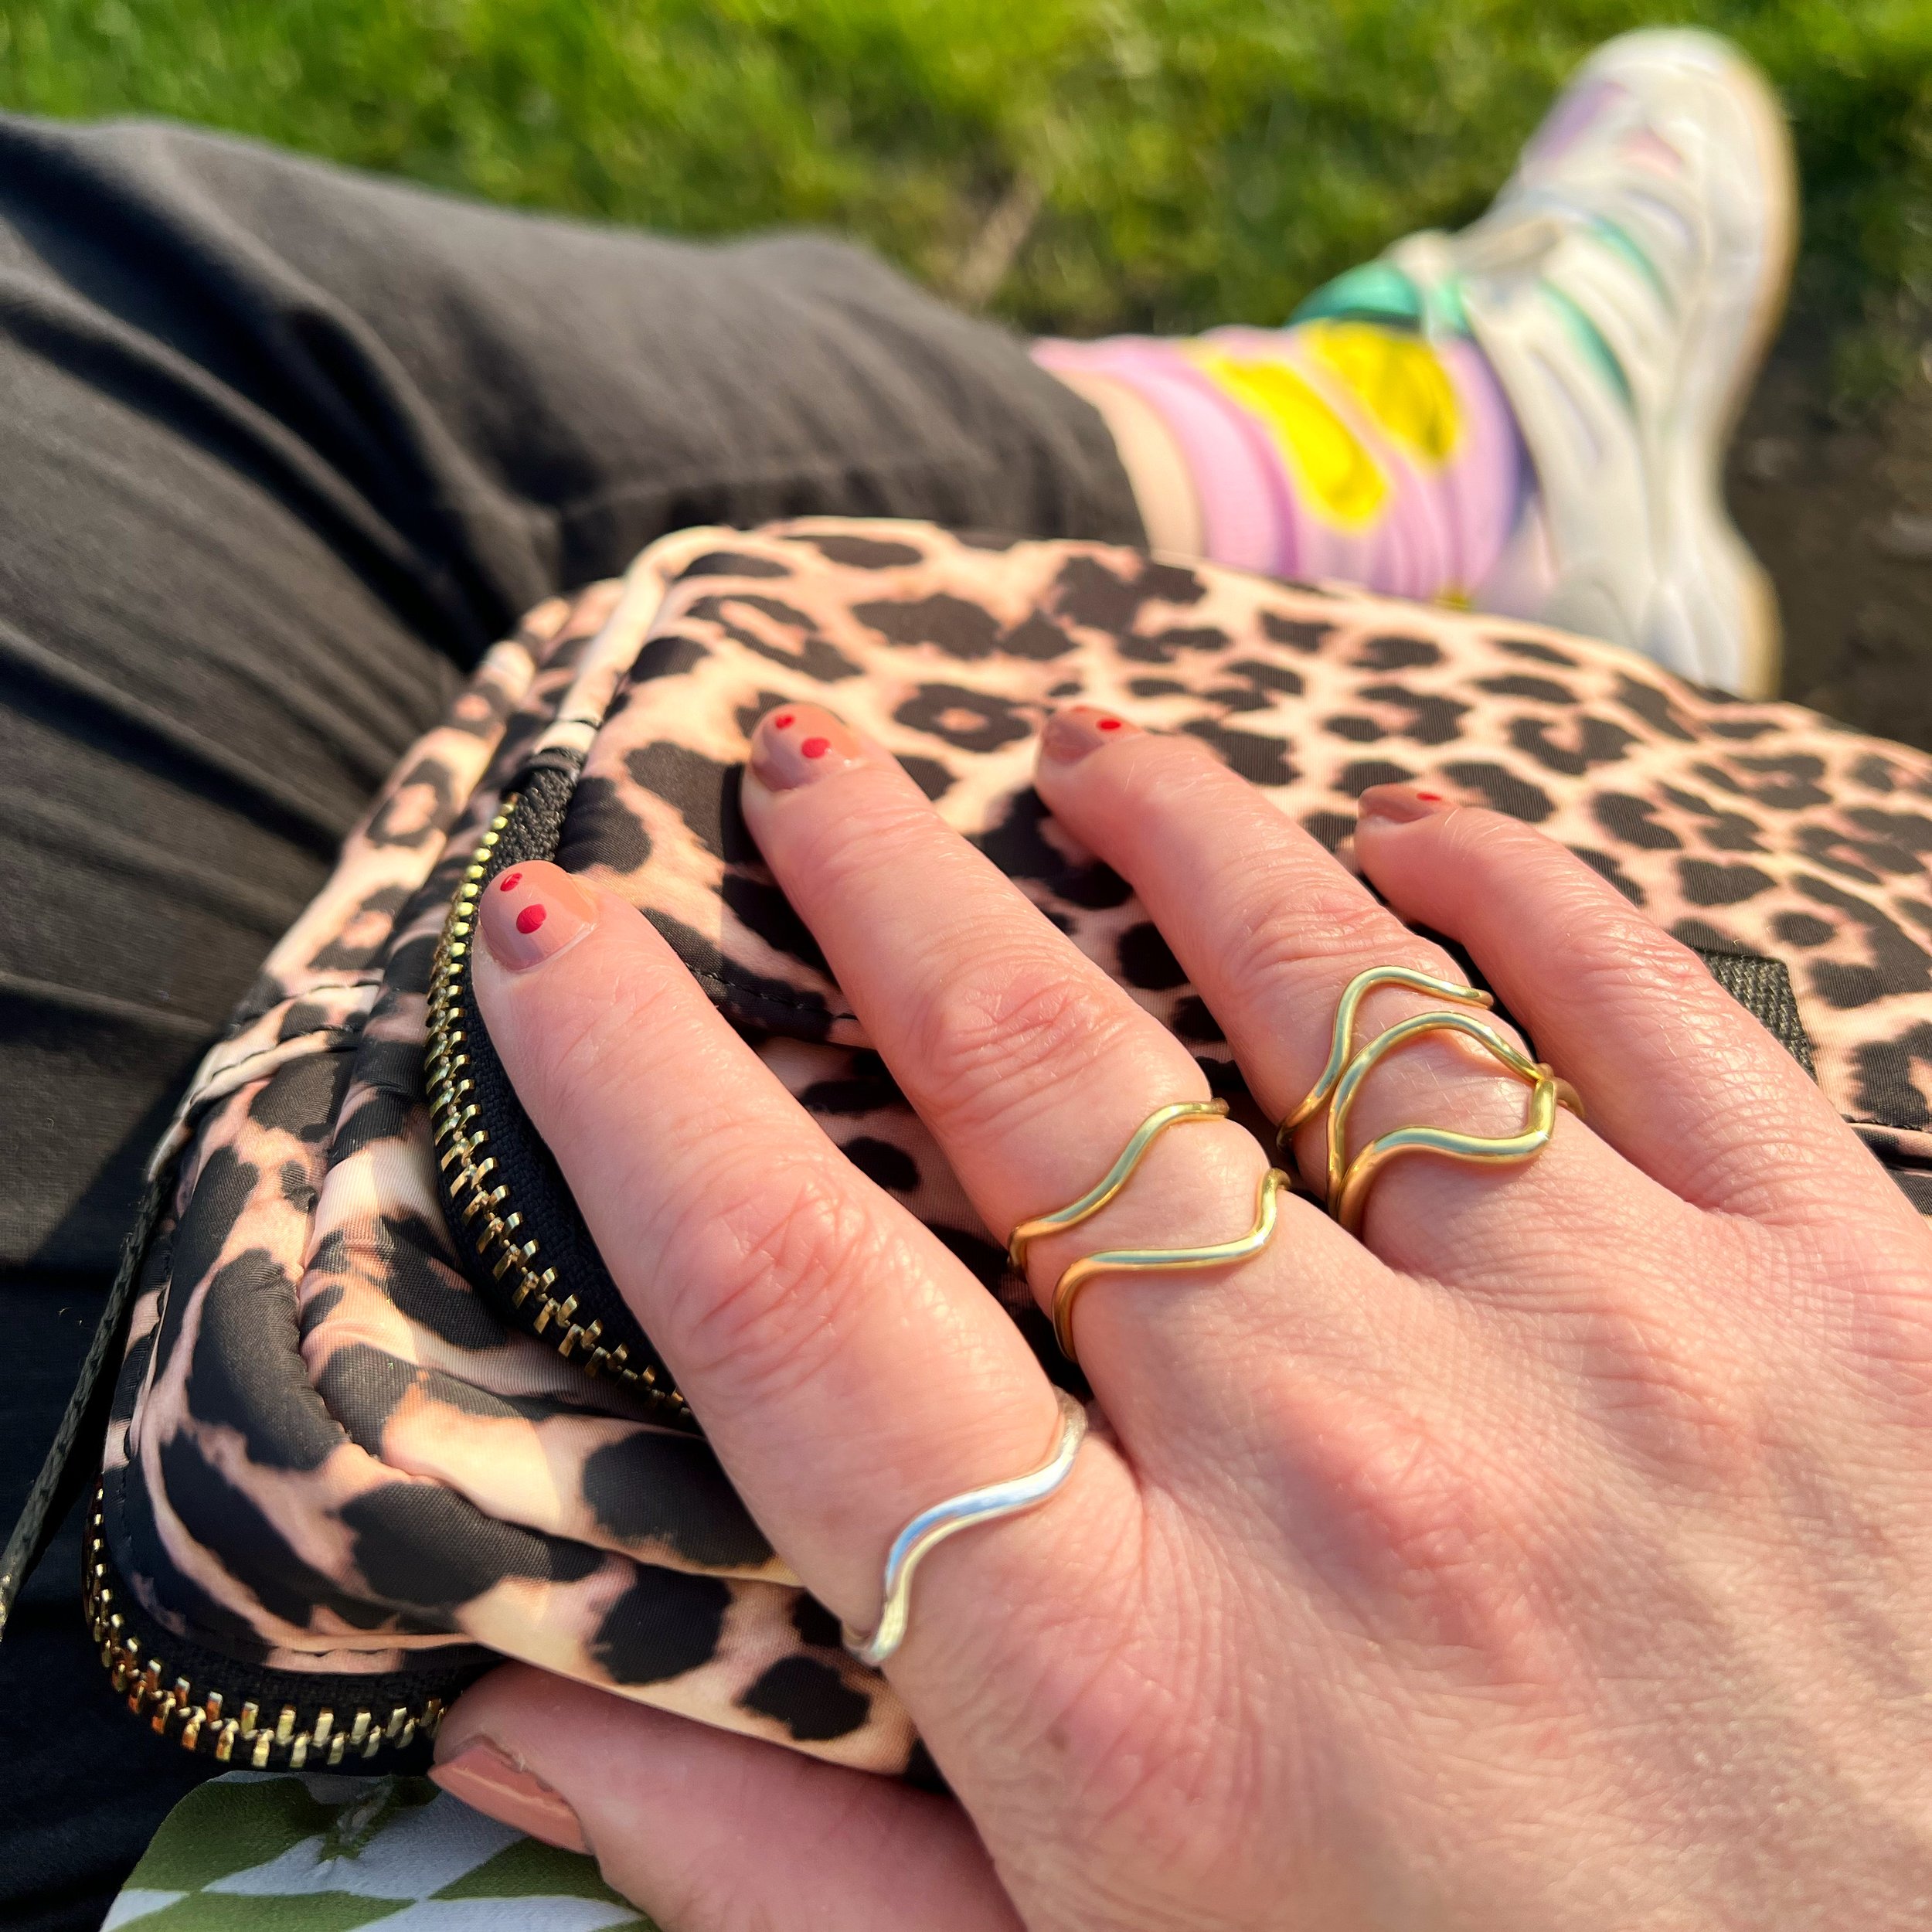  A close-up of a hand on a leopard print bag. The hand is adorned with 6 wiggly rings. 